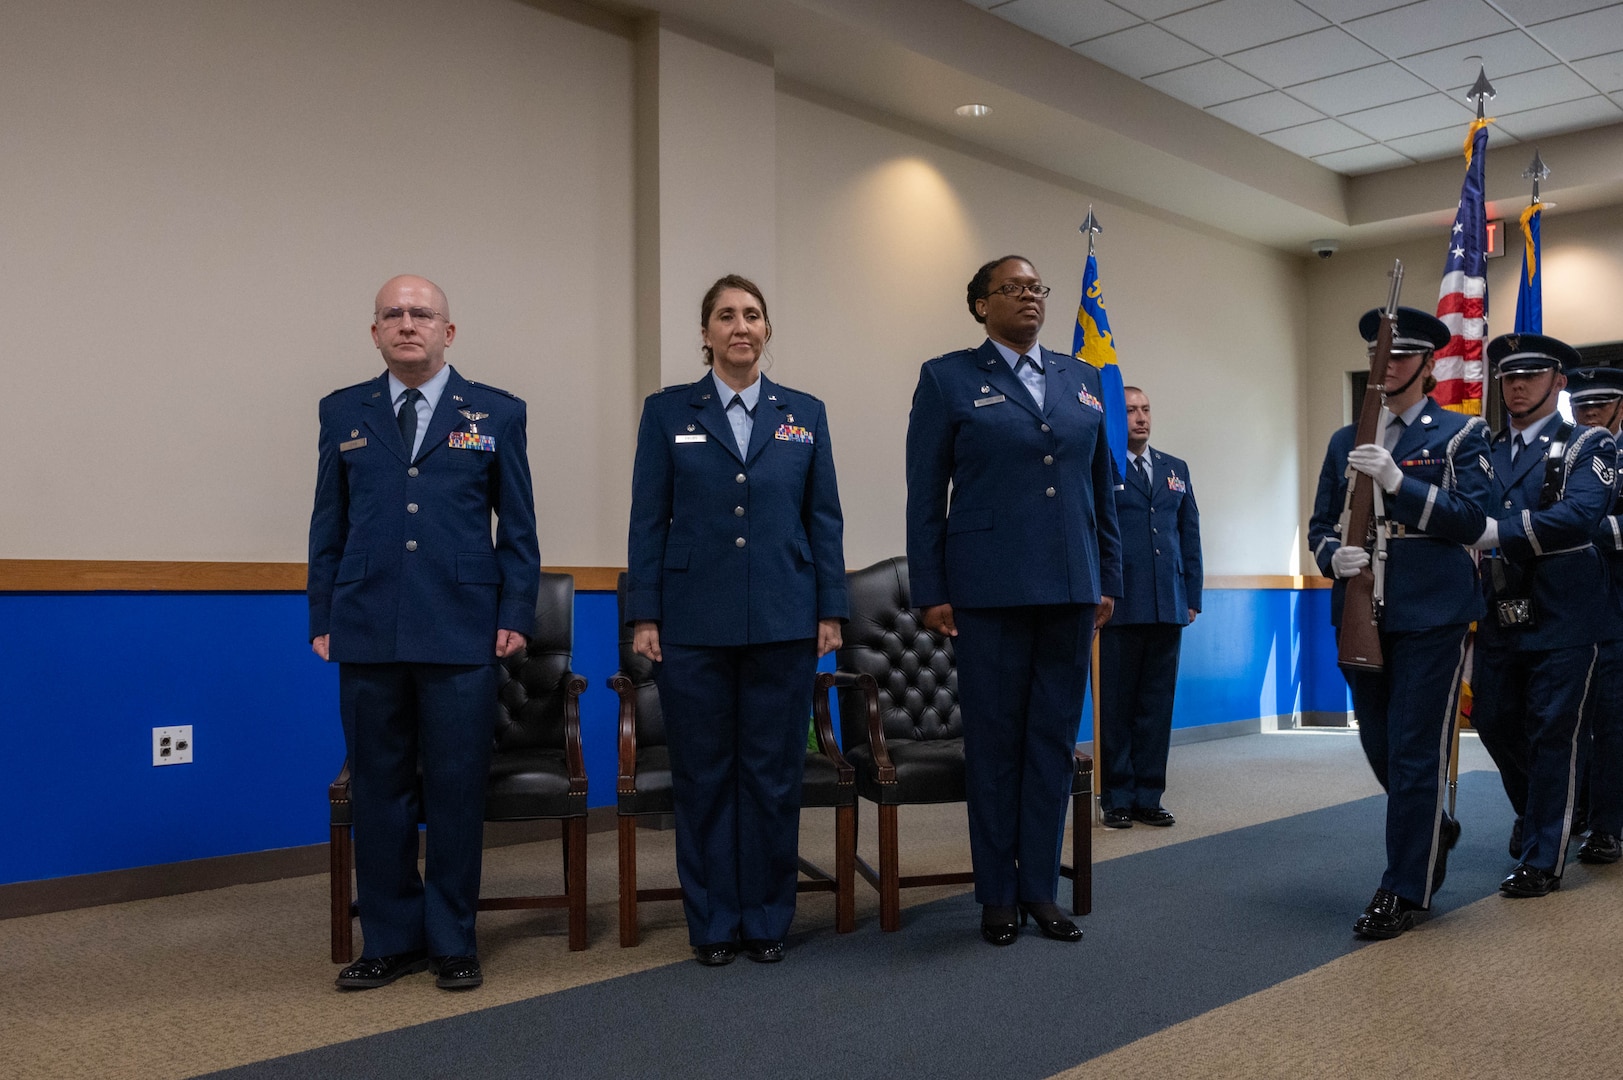 Members of the official party stand at the position of attention while the Joint Base San Antonio Honor Guard posts the colors at Joint Base San Antonio- Lackland, Texas